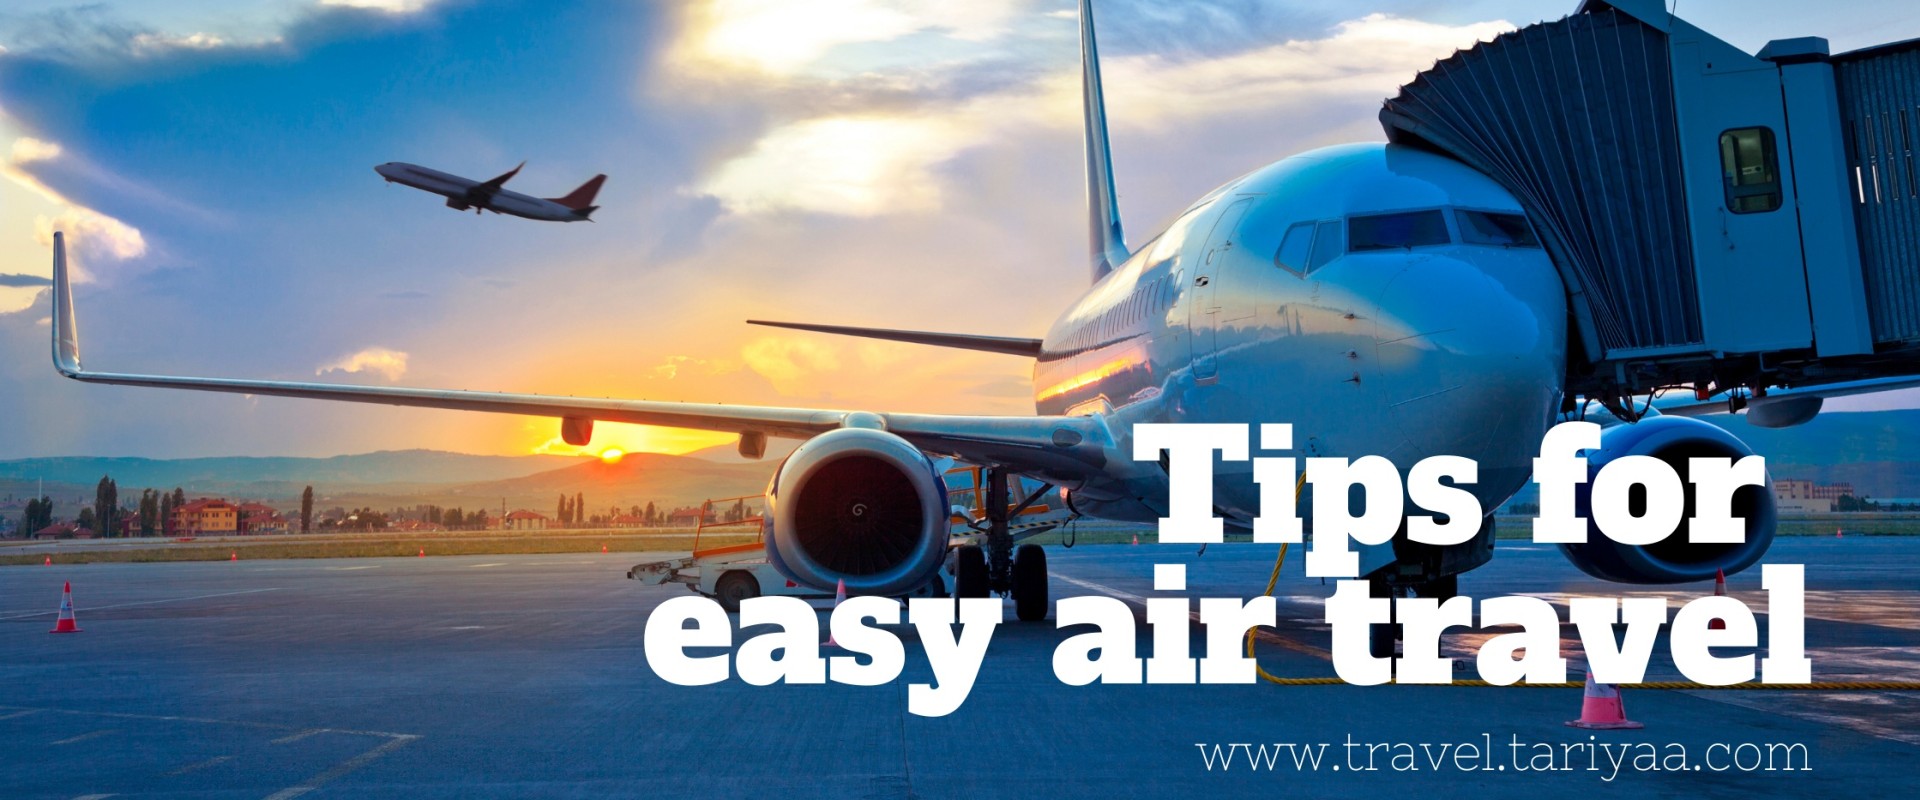 Expert Tips for Stress-Free Air Travel